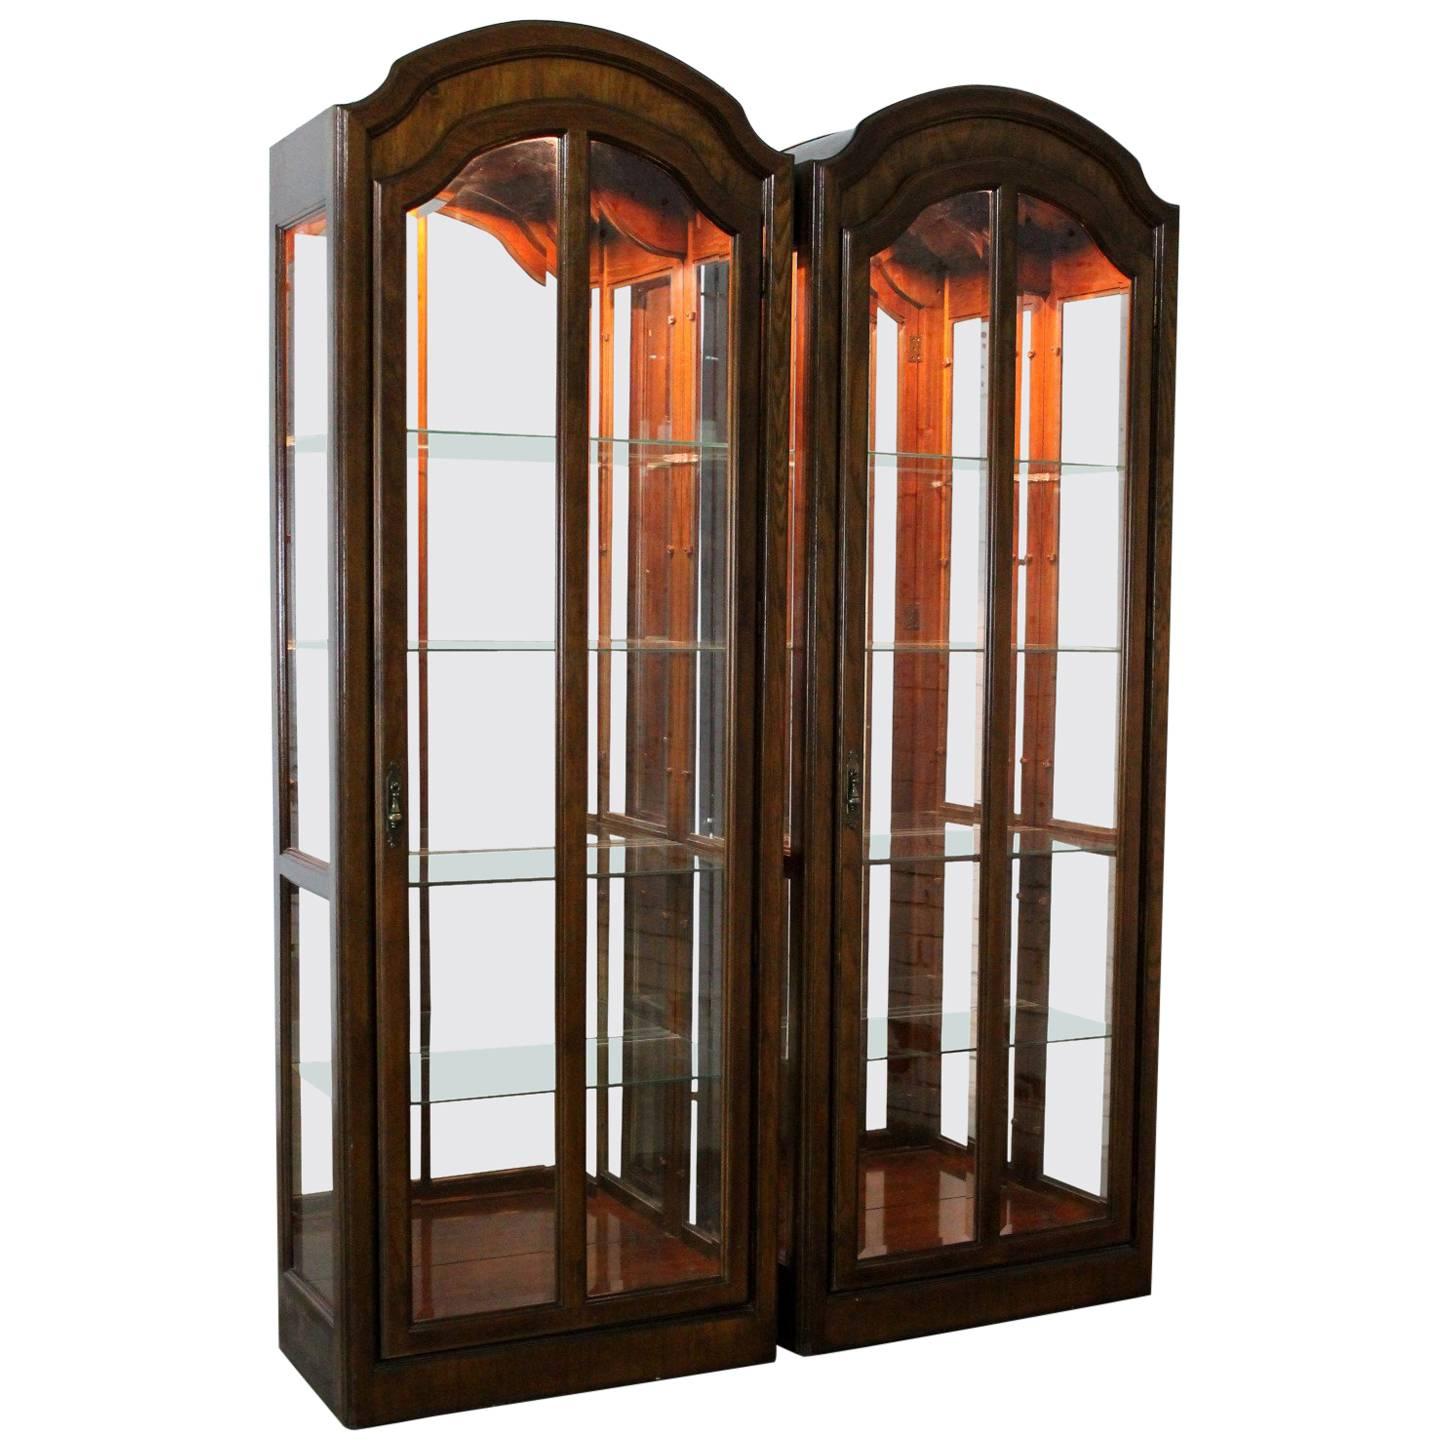 Lighted Curio Cabinets with Arched Top in Dark Wood a Vintage, Pair